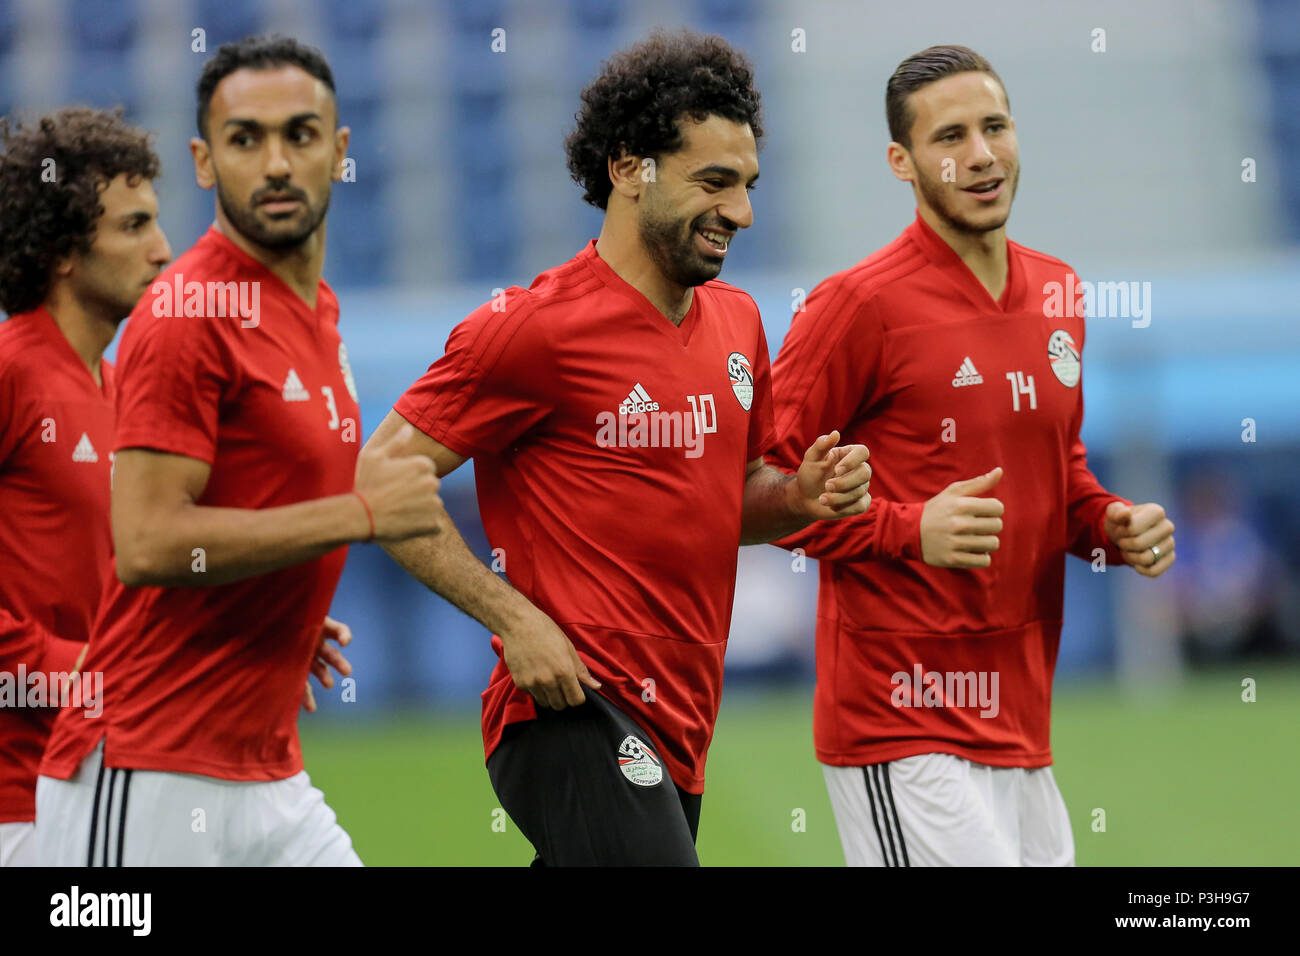 Saint Petersburg, Russia. 18th June, 2018. Egypt's Ahmed Elmohamady (L), Mohamed Salah (C) and Ramadan Sobhi take part in a training session for Egypt's National soccer team ahead of Tuesday's FIFA World Cup 2018 Group A soccer match between Egypt and Russia, in Saint Petersburg, Russia, 18 June 2018. Credit: Ahmed Ramadan/dpa/Alamy Live News Stock Photo